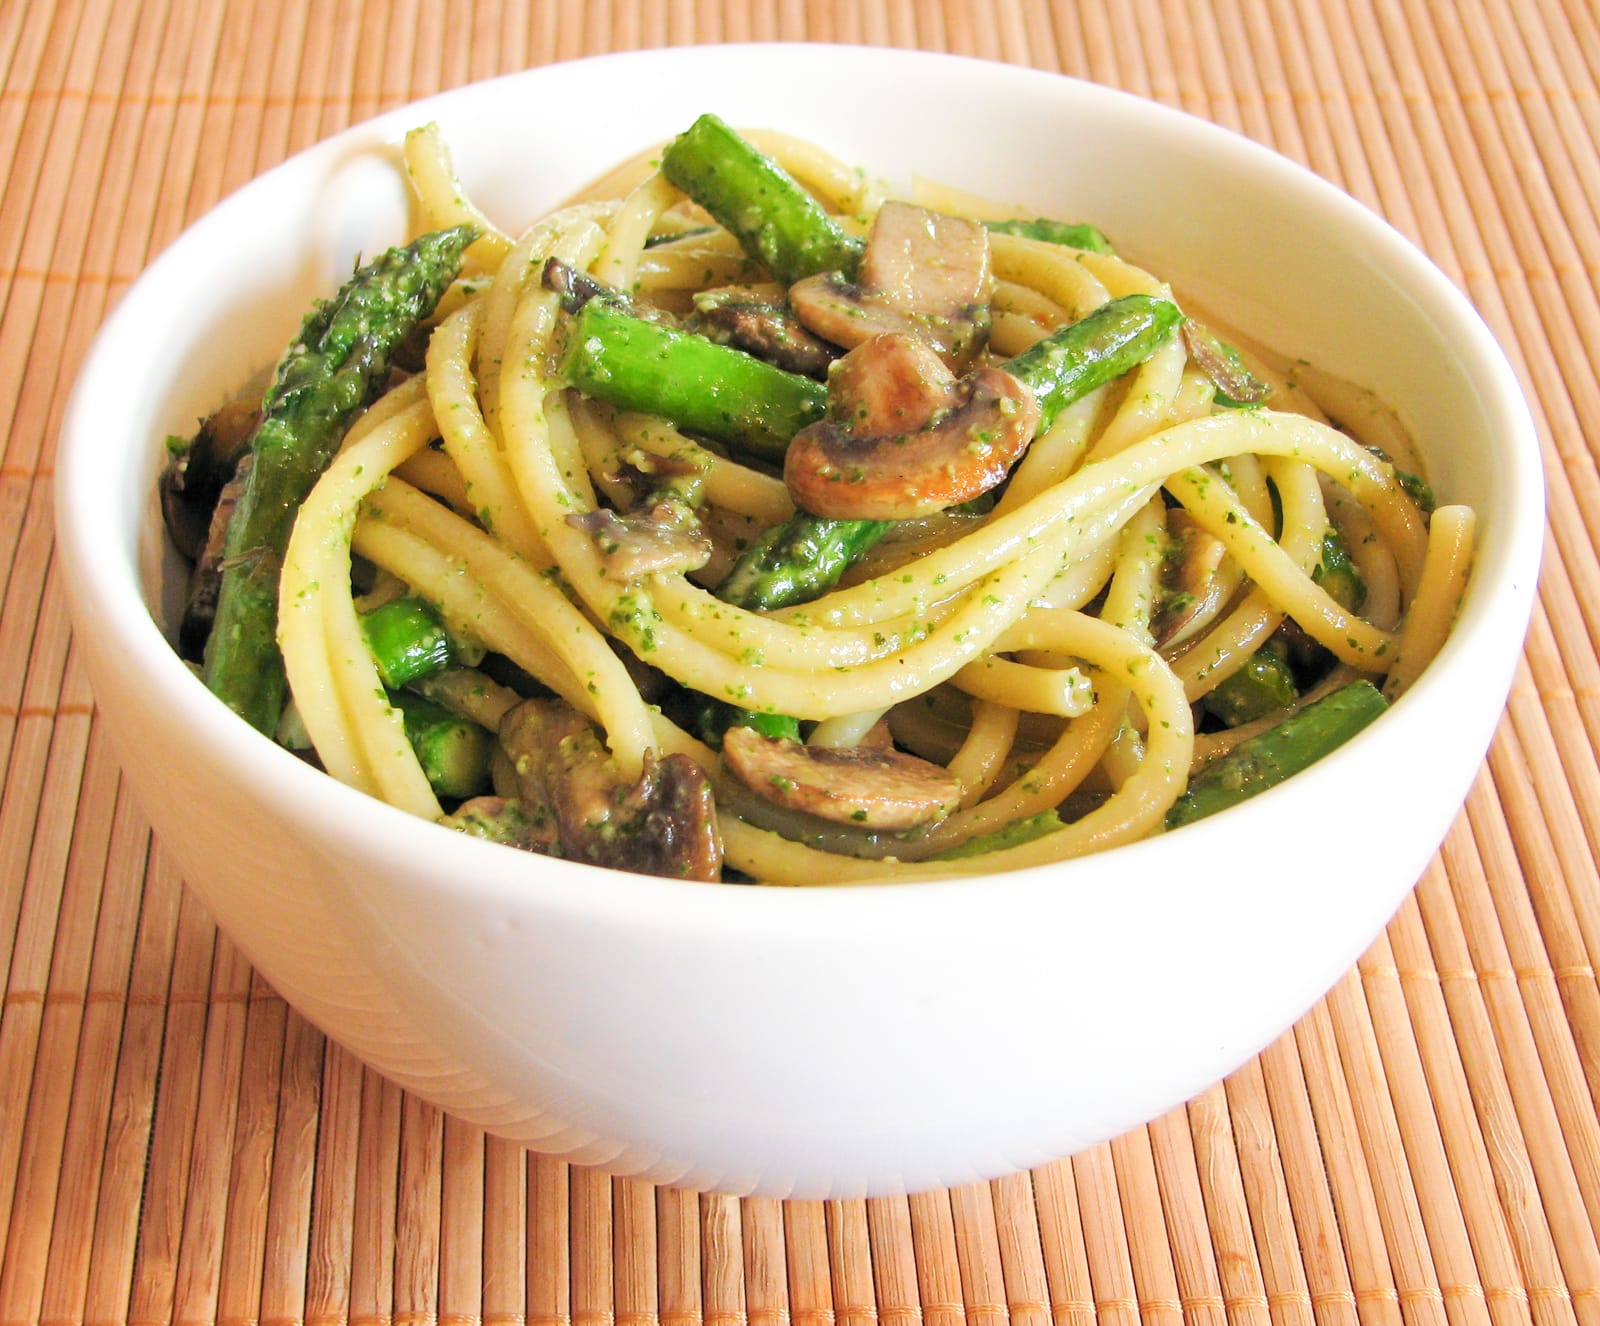 Pasta with Mushrooms and Asparagus in a Pesto Sauce